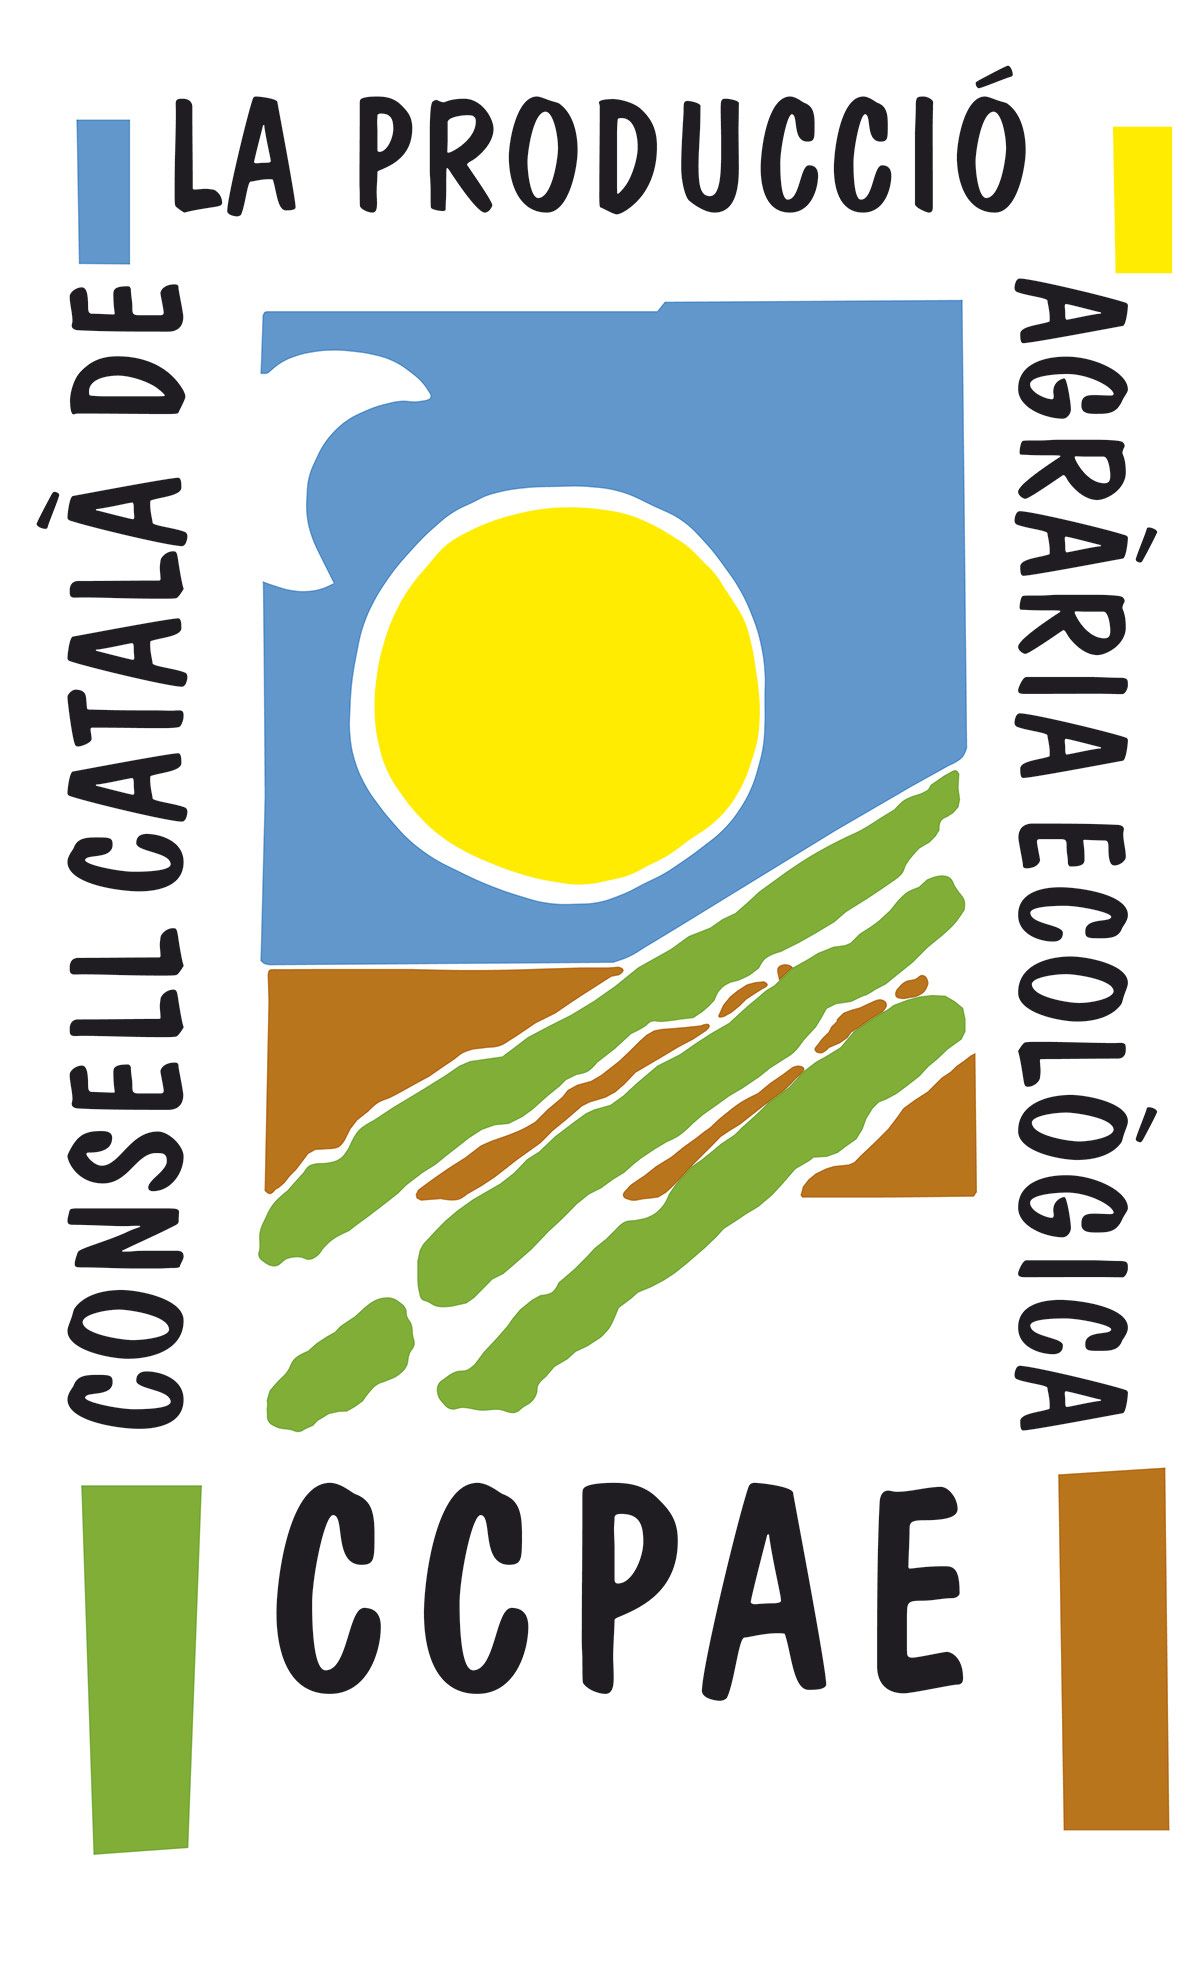 Organic Agricultural Production (CCPAE)